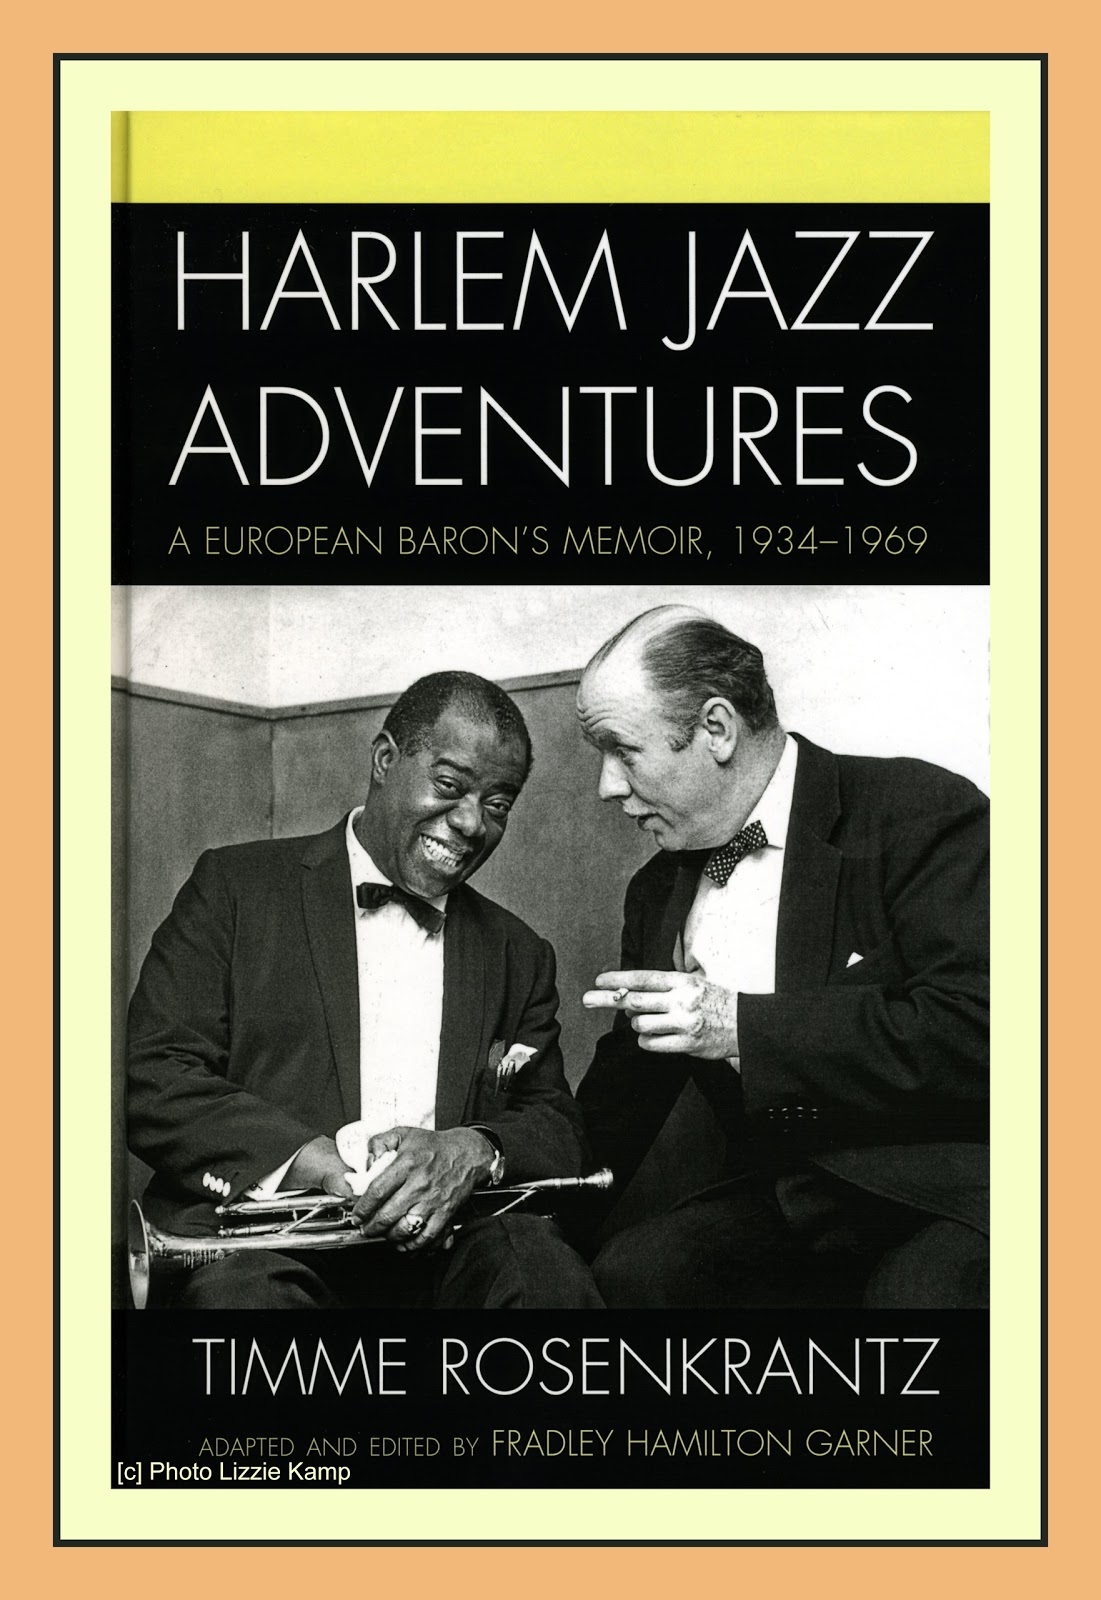 Skuespiller Hård ring Bloodstained JazzProfiles: A Review of Harlem Jazz Adventures: A European Baron's  Memoir, 1934-1969 [From the Archives]